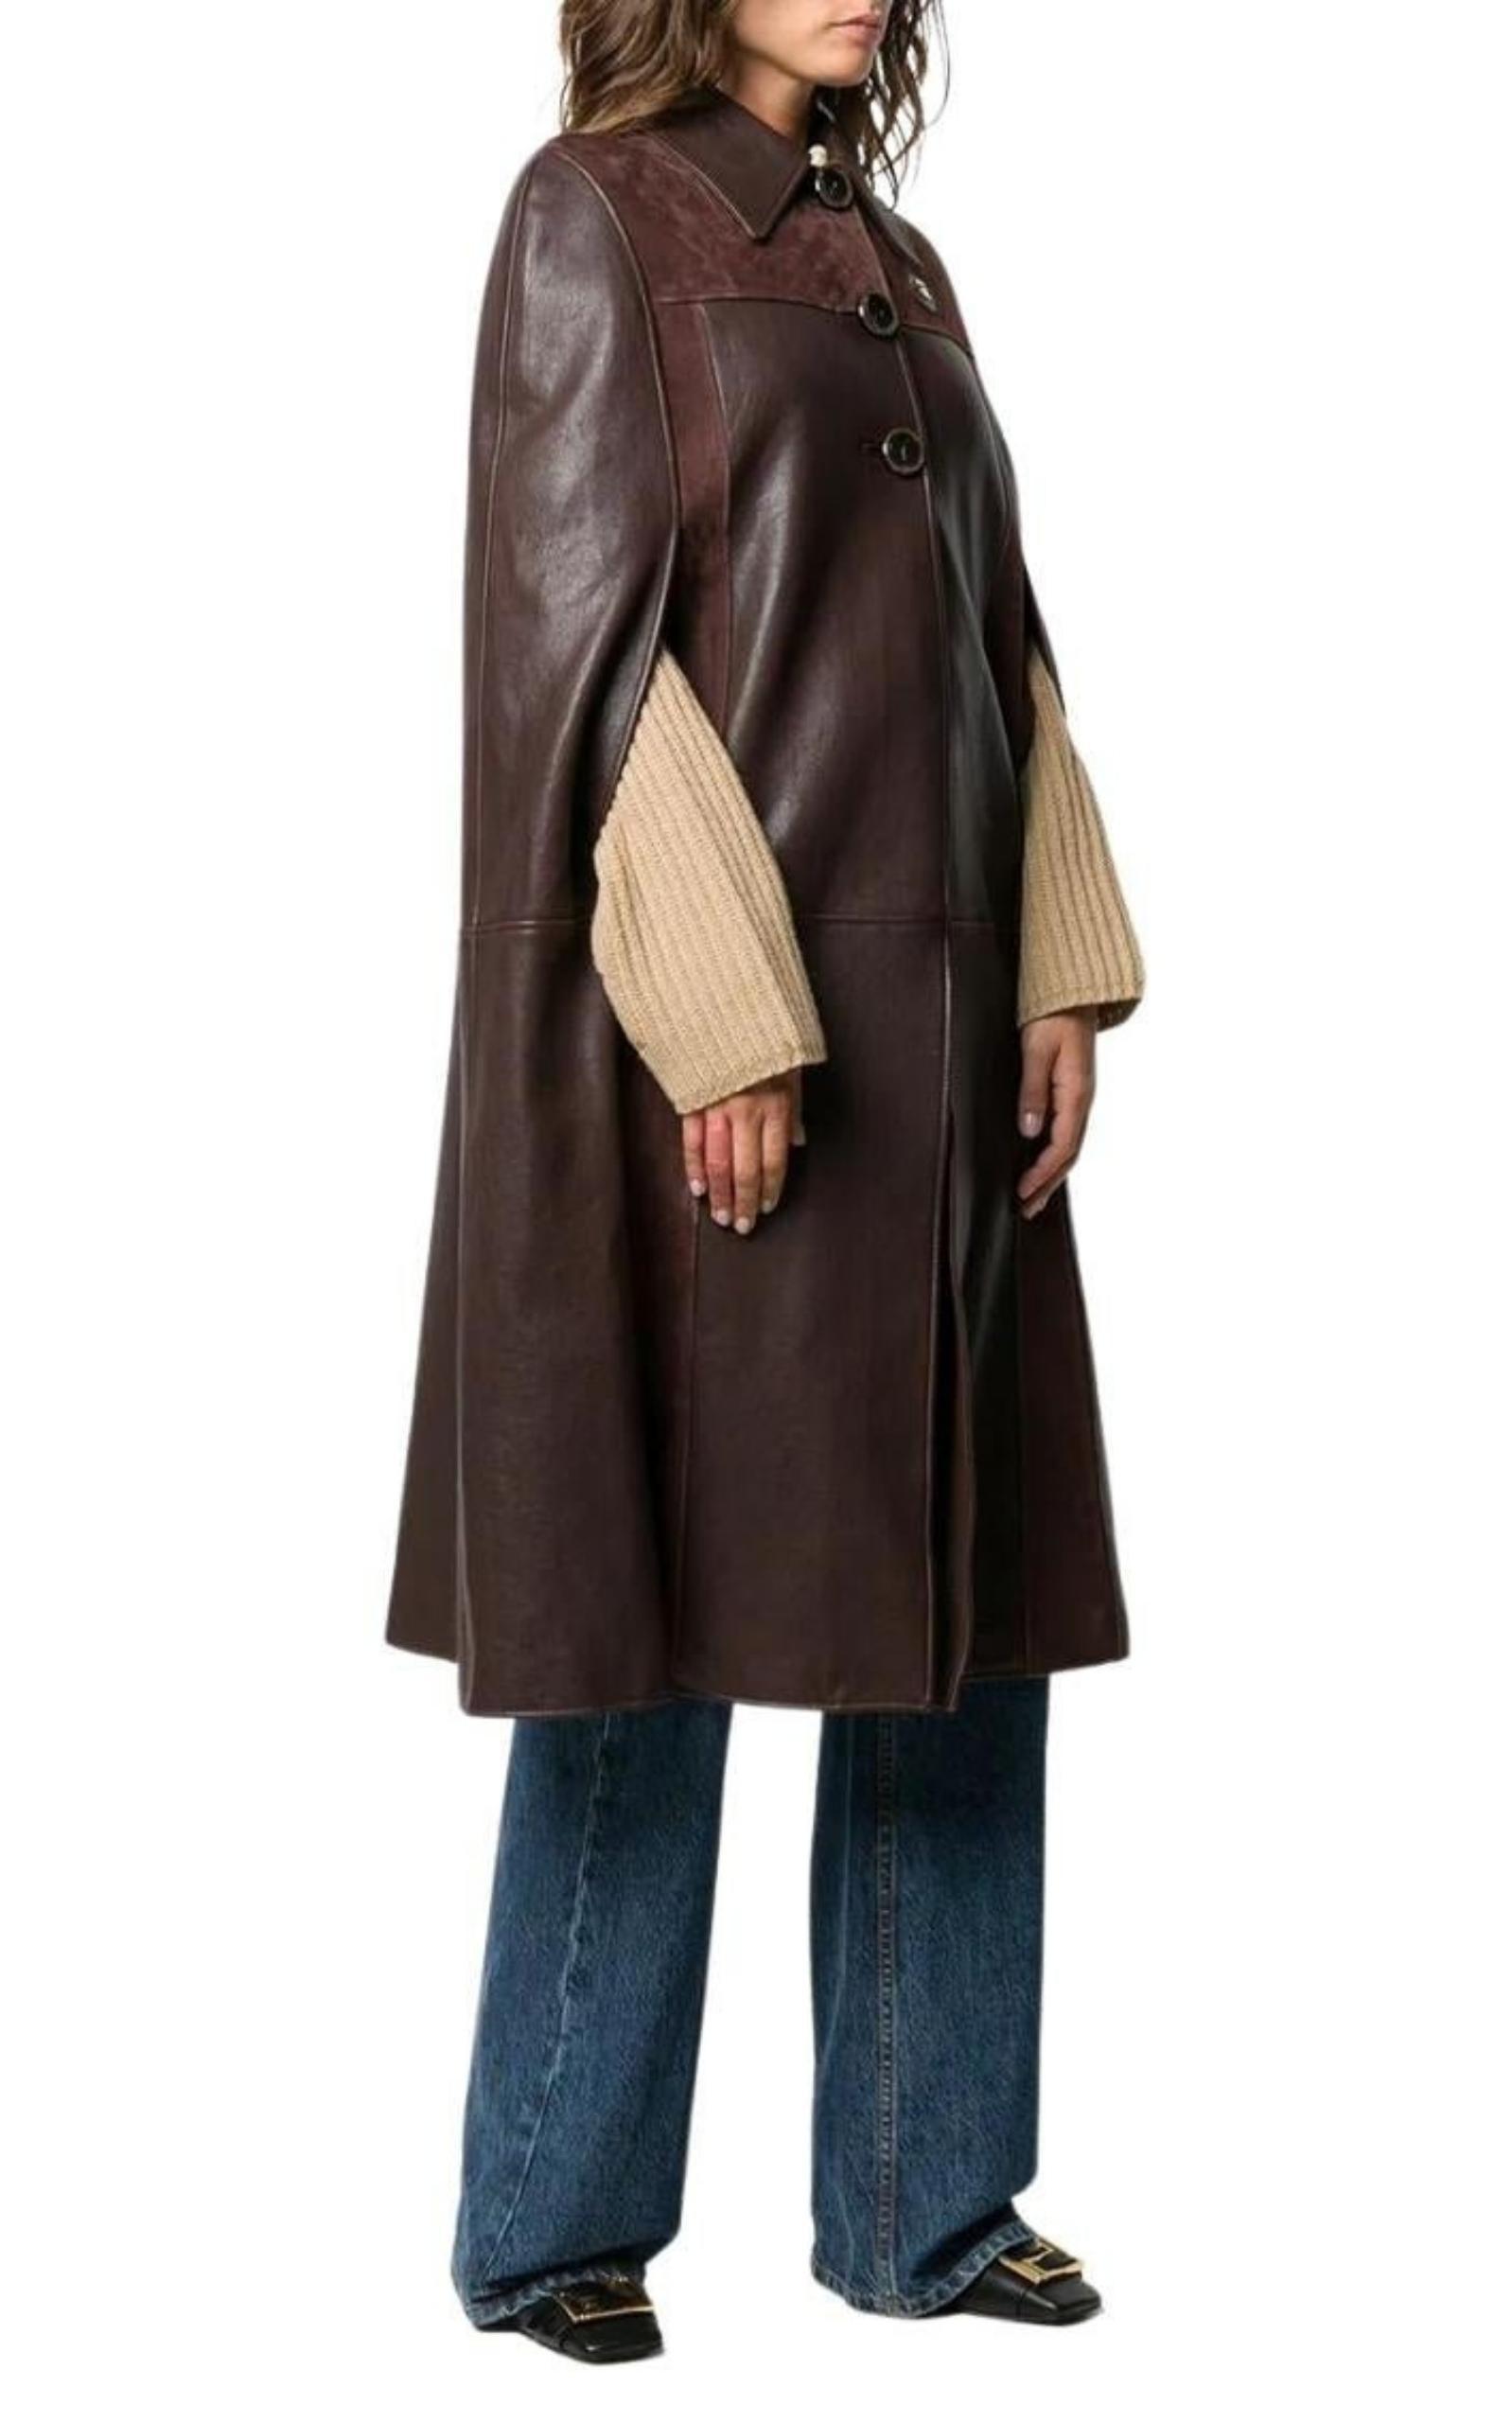  GucciGG-logo Leather And Suede Cape - Runway Catalog